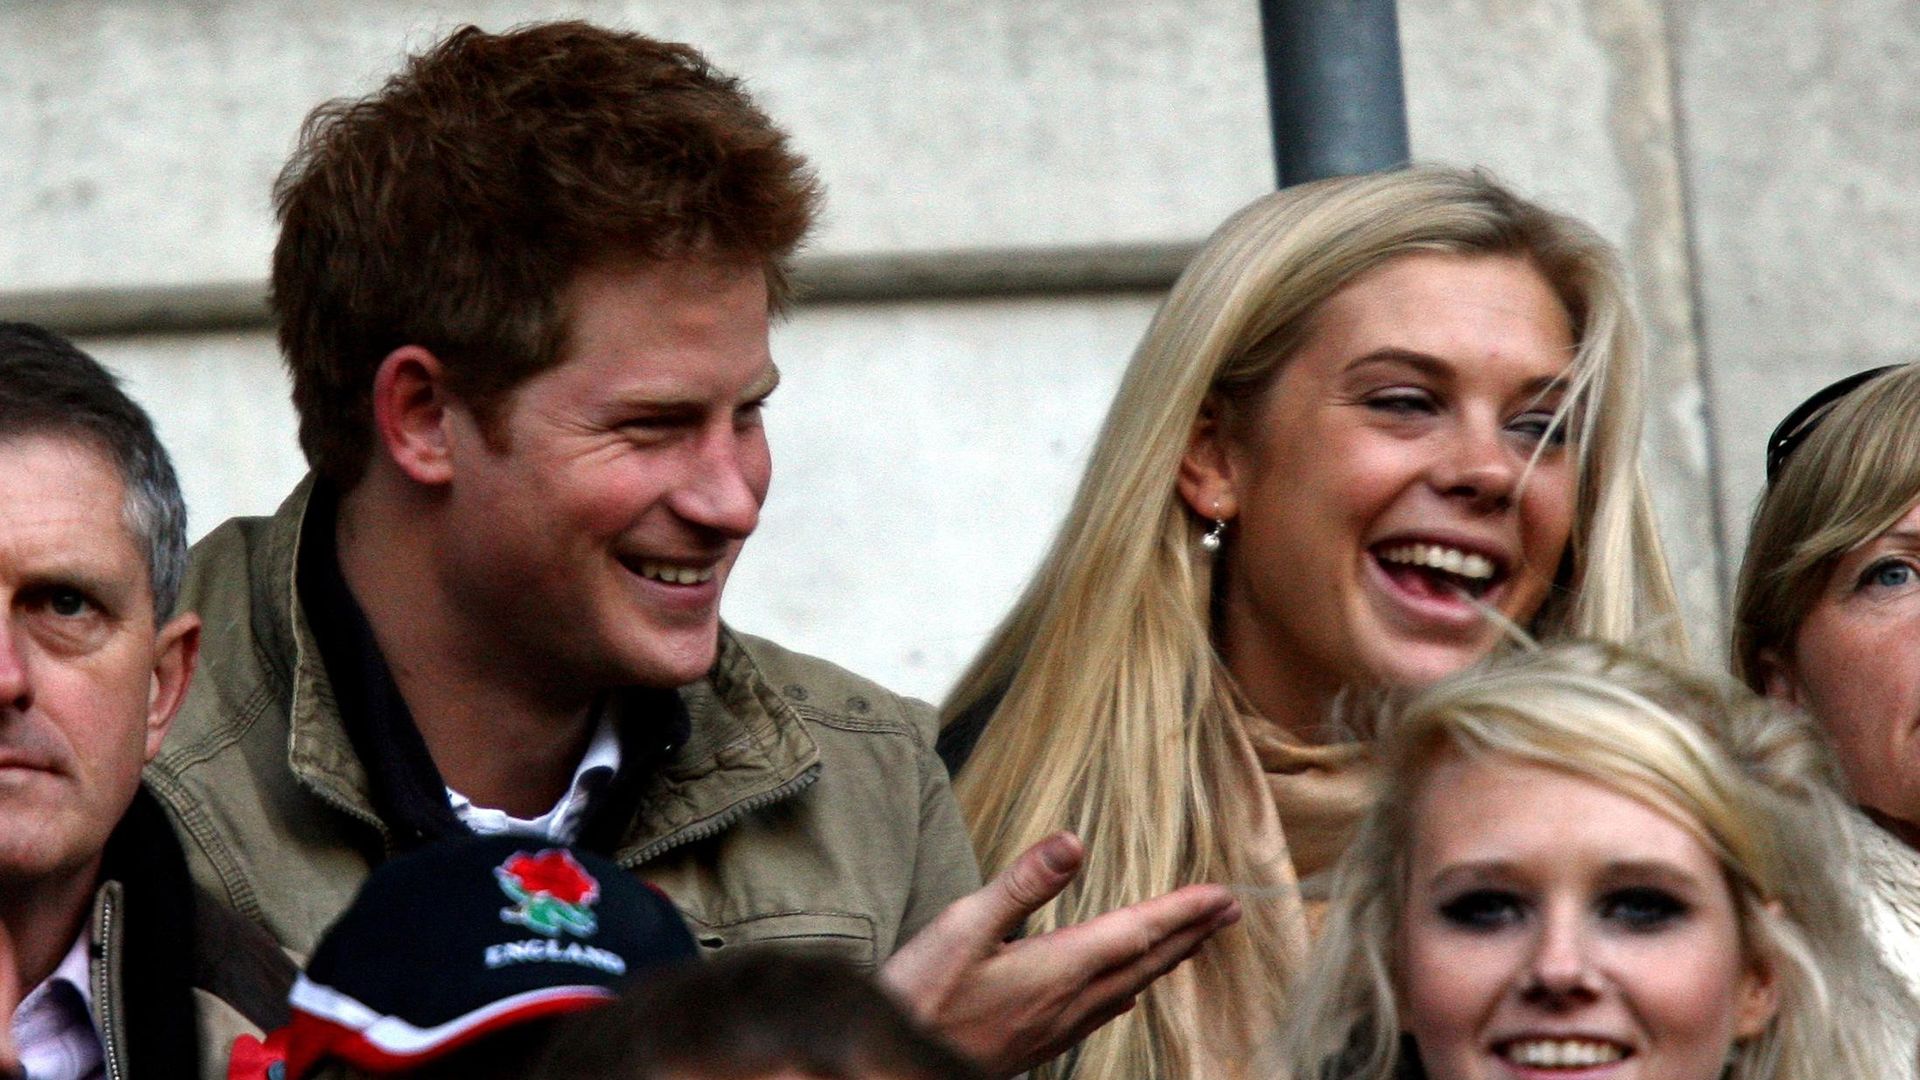 Prince Harry and Chelsy Davy sat smiling watching rugby together